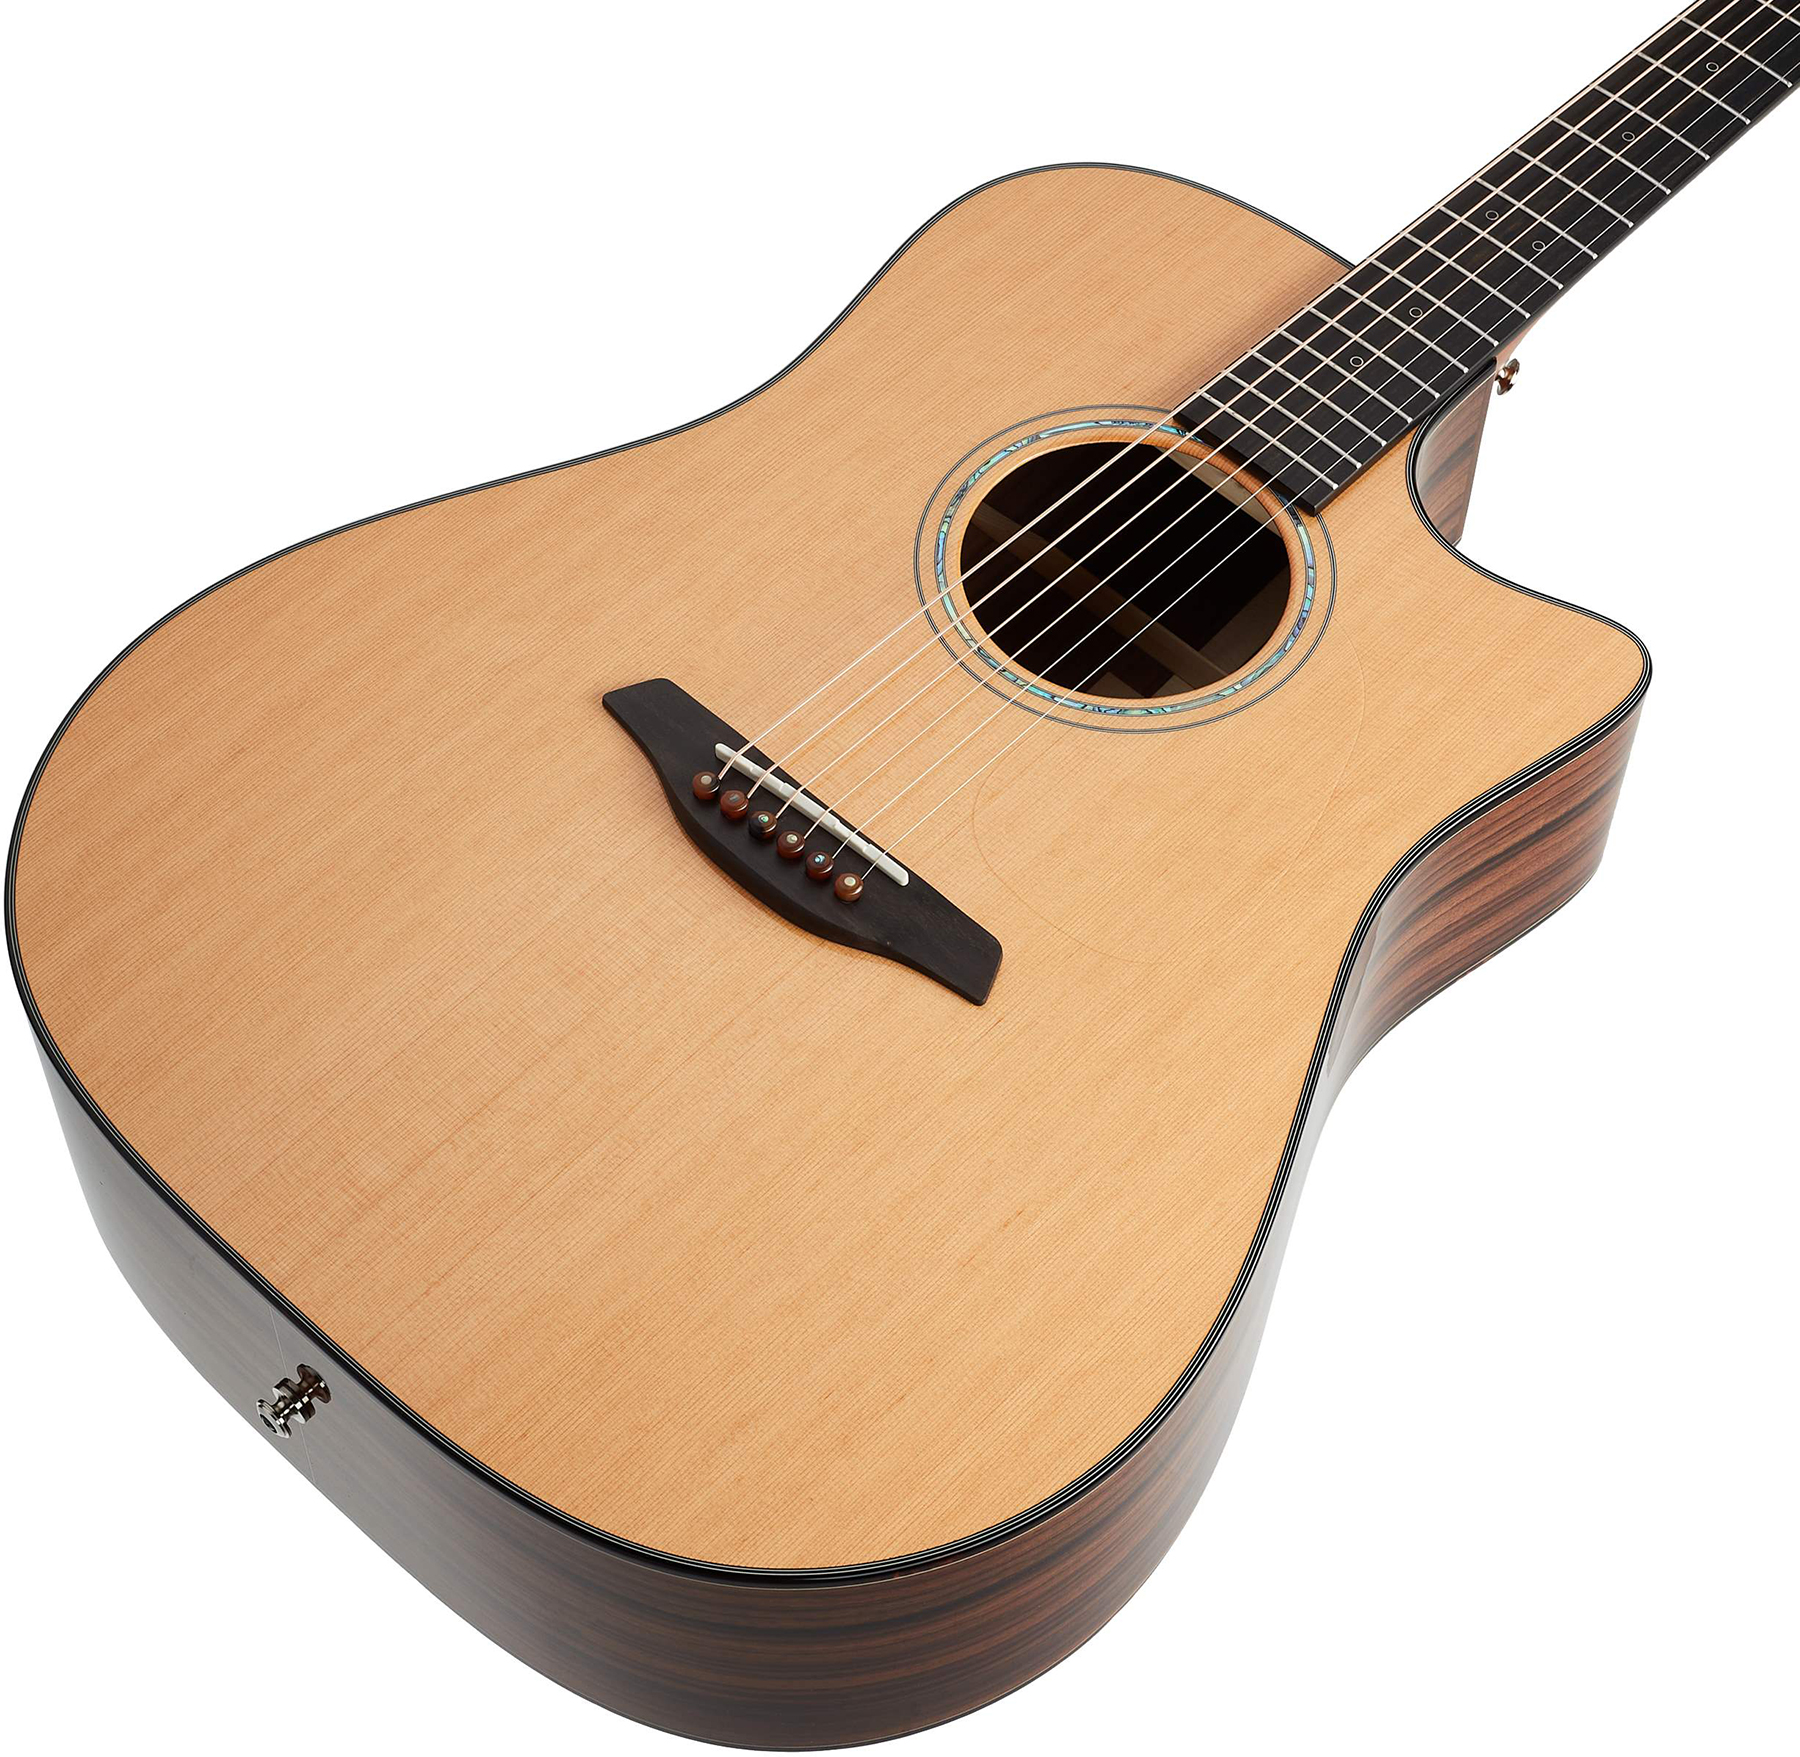 Furch Dc-cr Lrb1 Yellow Dreadnought Cw Cedre Palissandre Eb - Natural Full-pore - Guitare Electro Acoustique - Variation 2